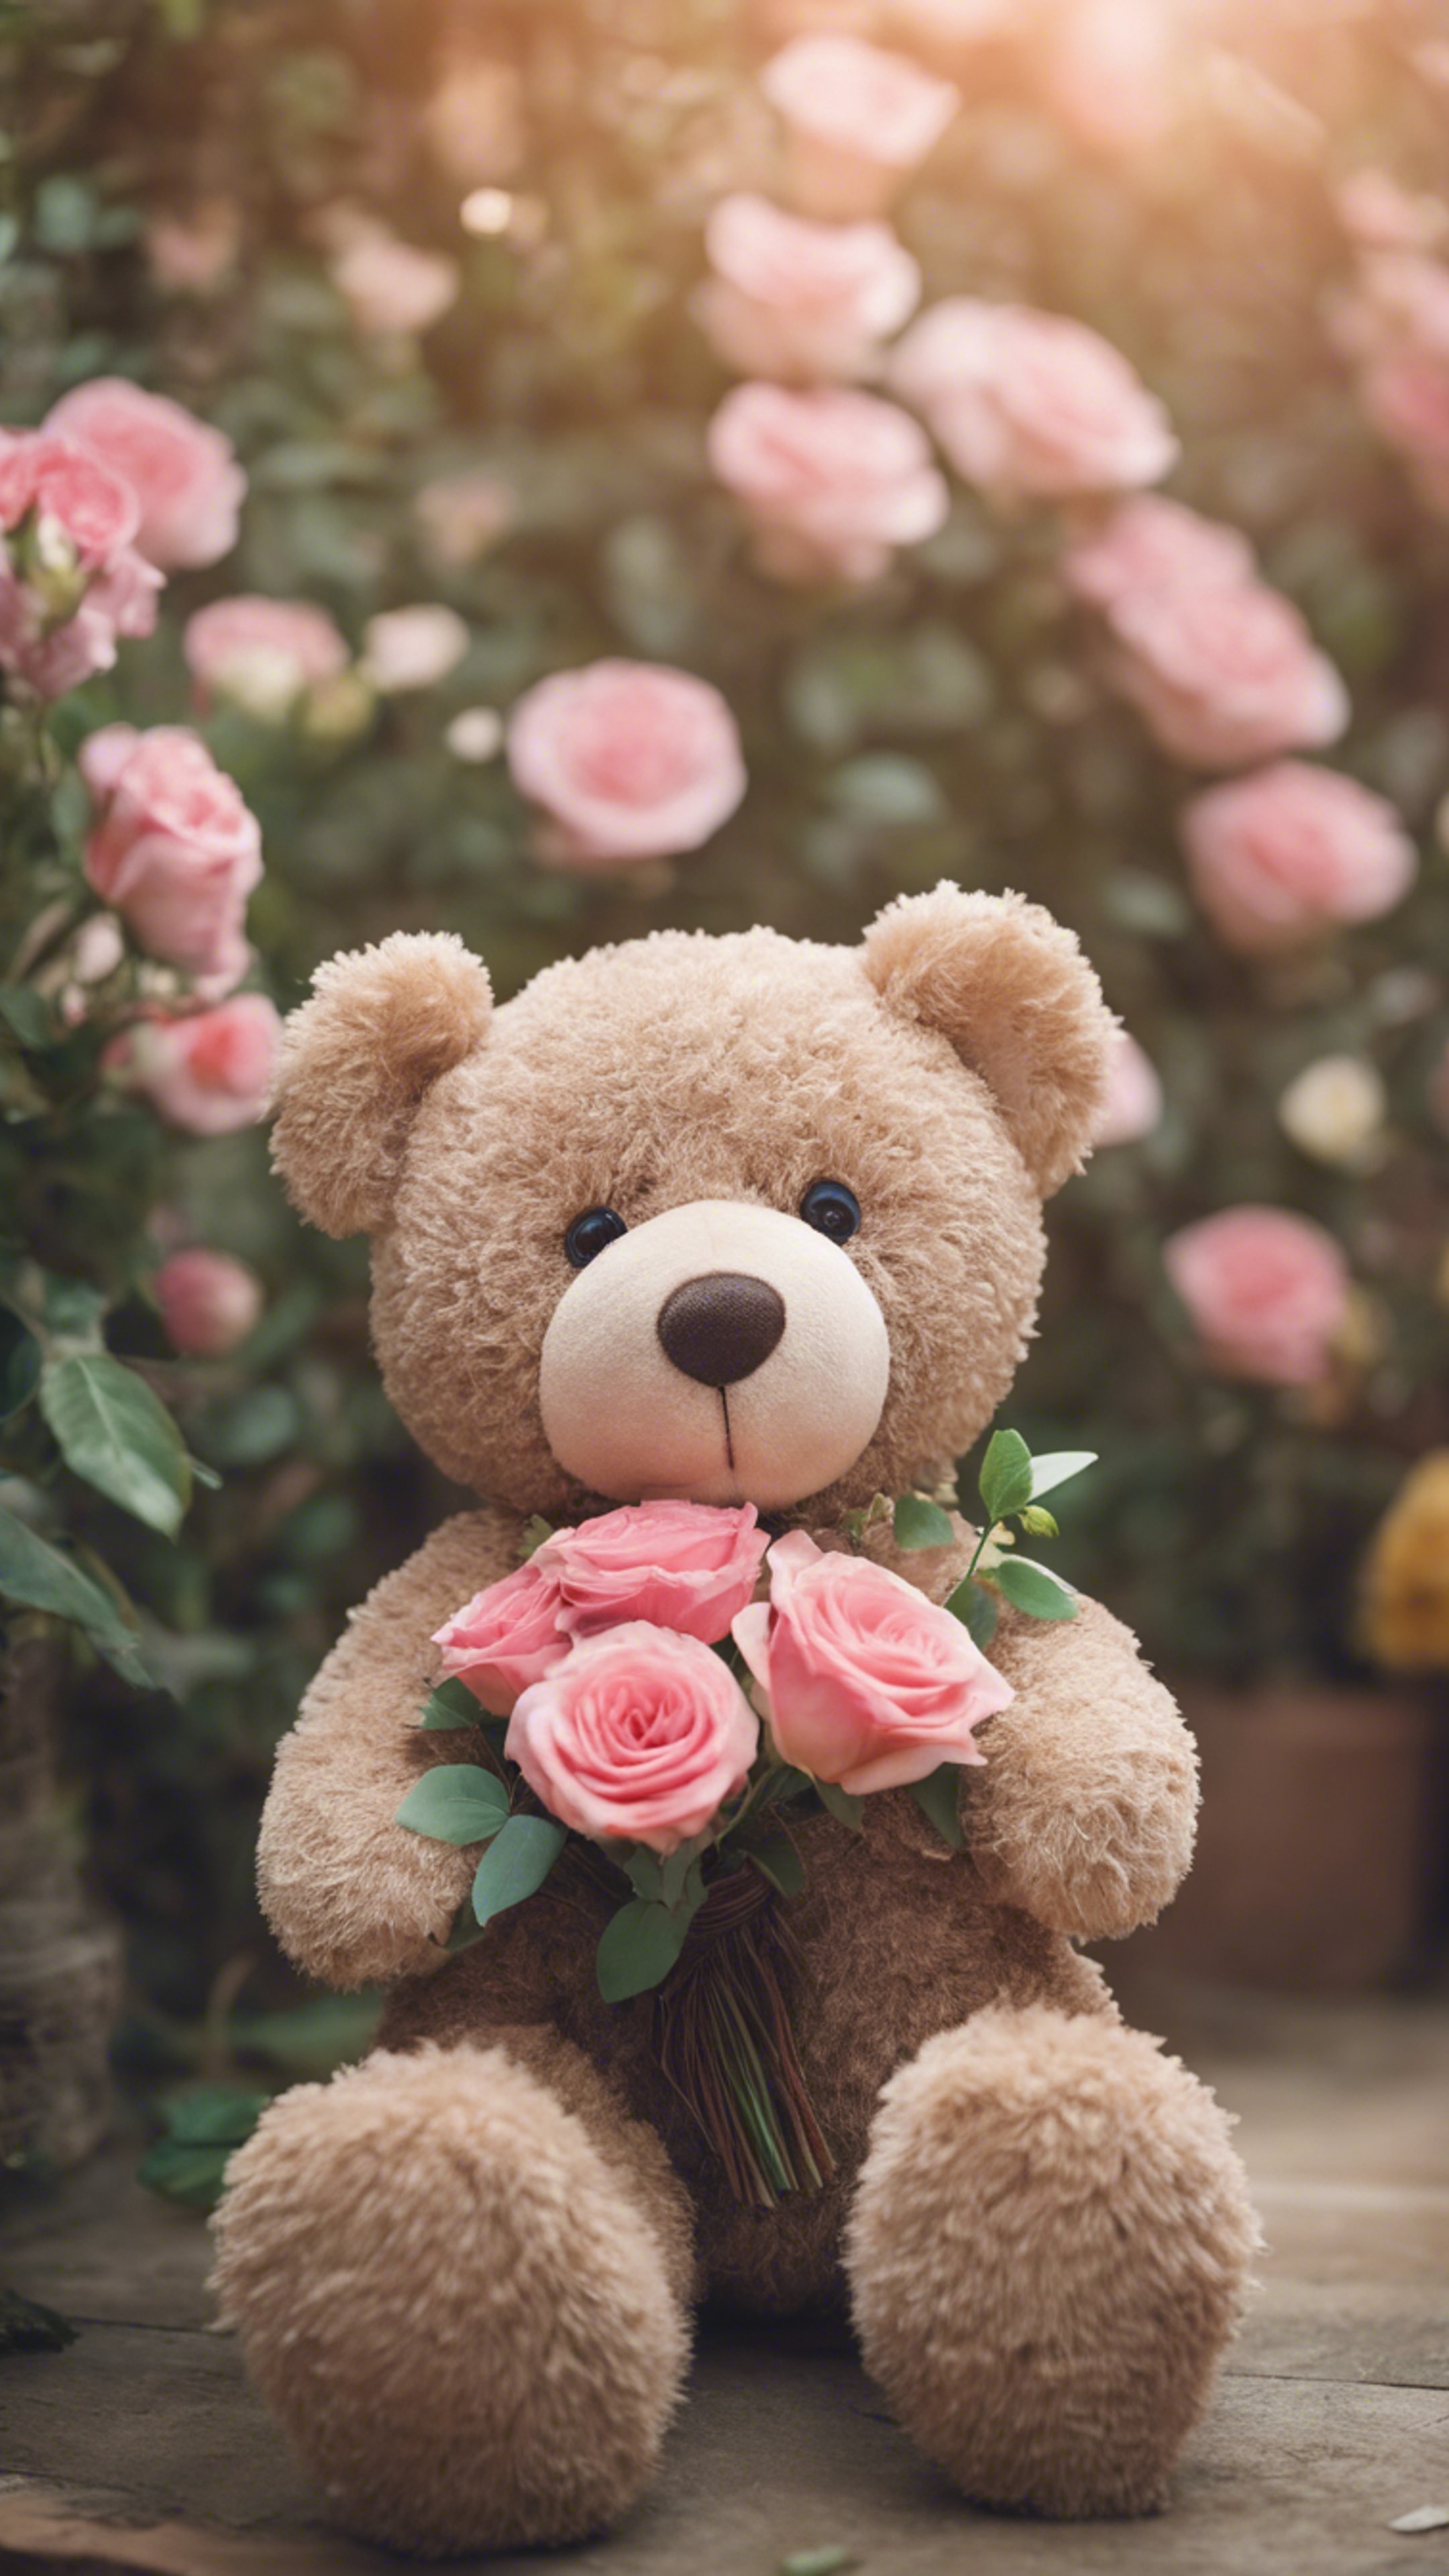 A teddy bear in a romantic setting, holding a bouquet of roses. Валлпапер[0c0a94ba405548b0bff3]